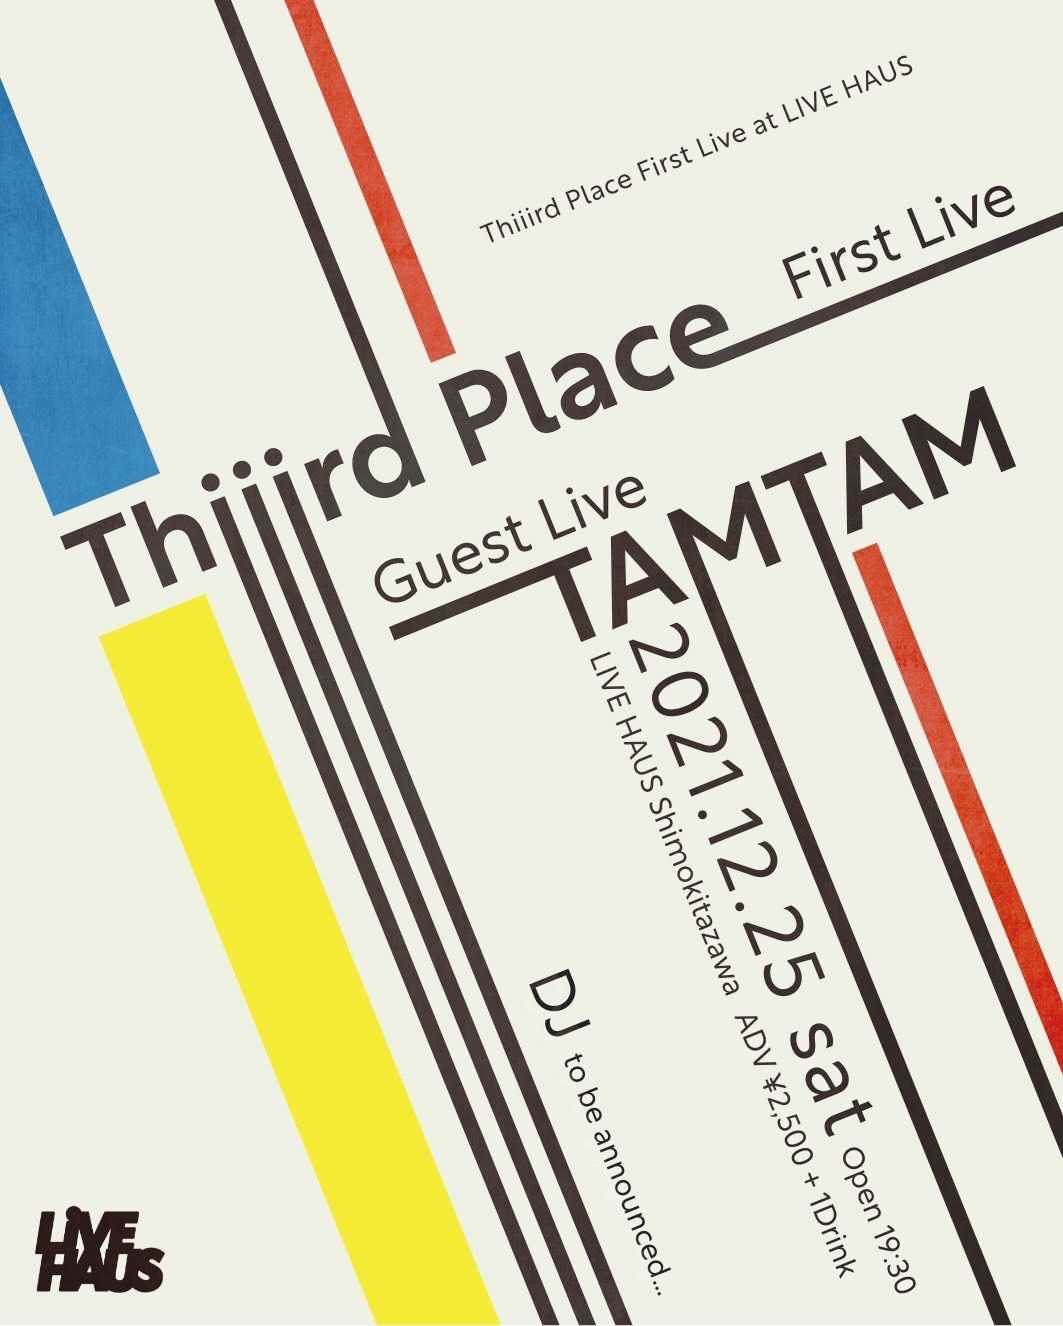 flyer for Thiiird Place First Live  at LIVE HAUS Shimokitazawa